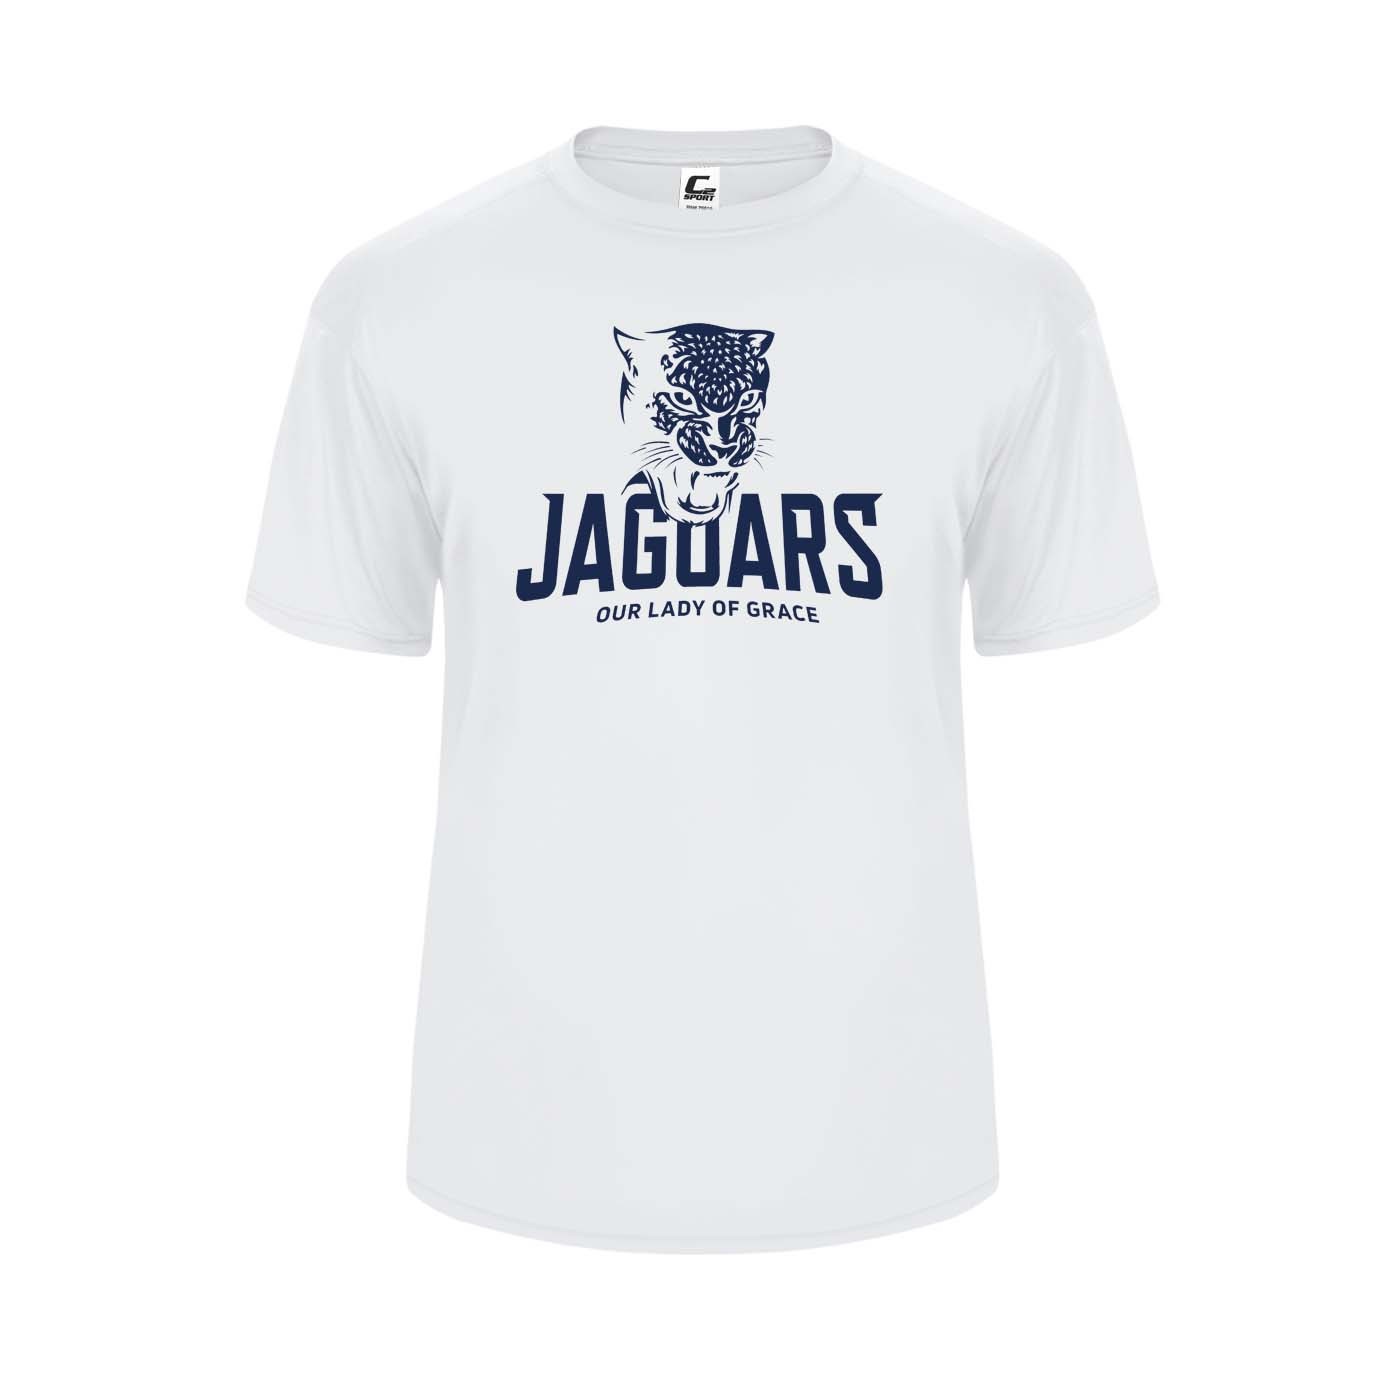 OLG Spirit S/S Performance T-Shirt w/ Navy Logo - Please Allow 2-3 Weeks for Delivery